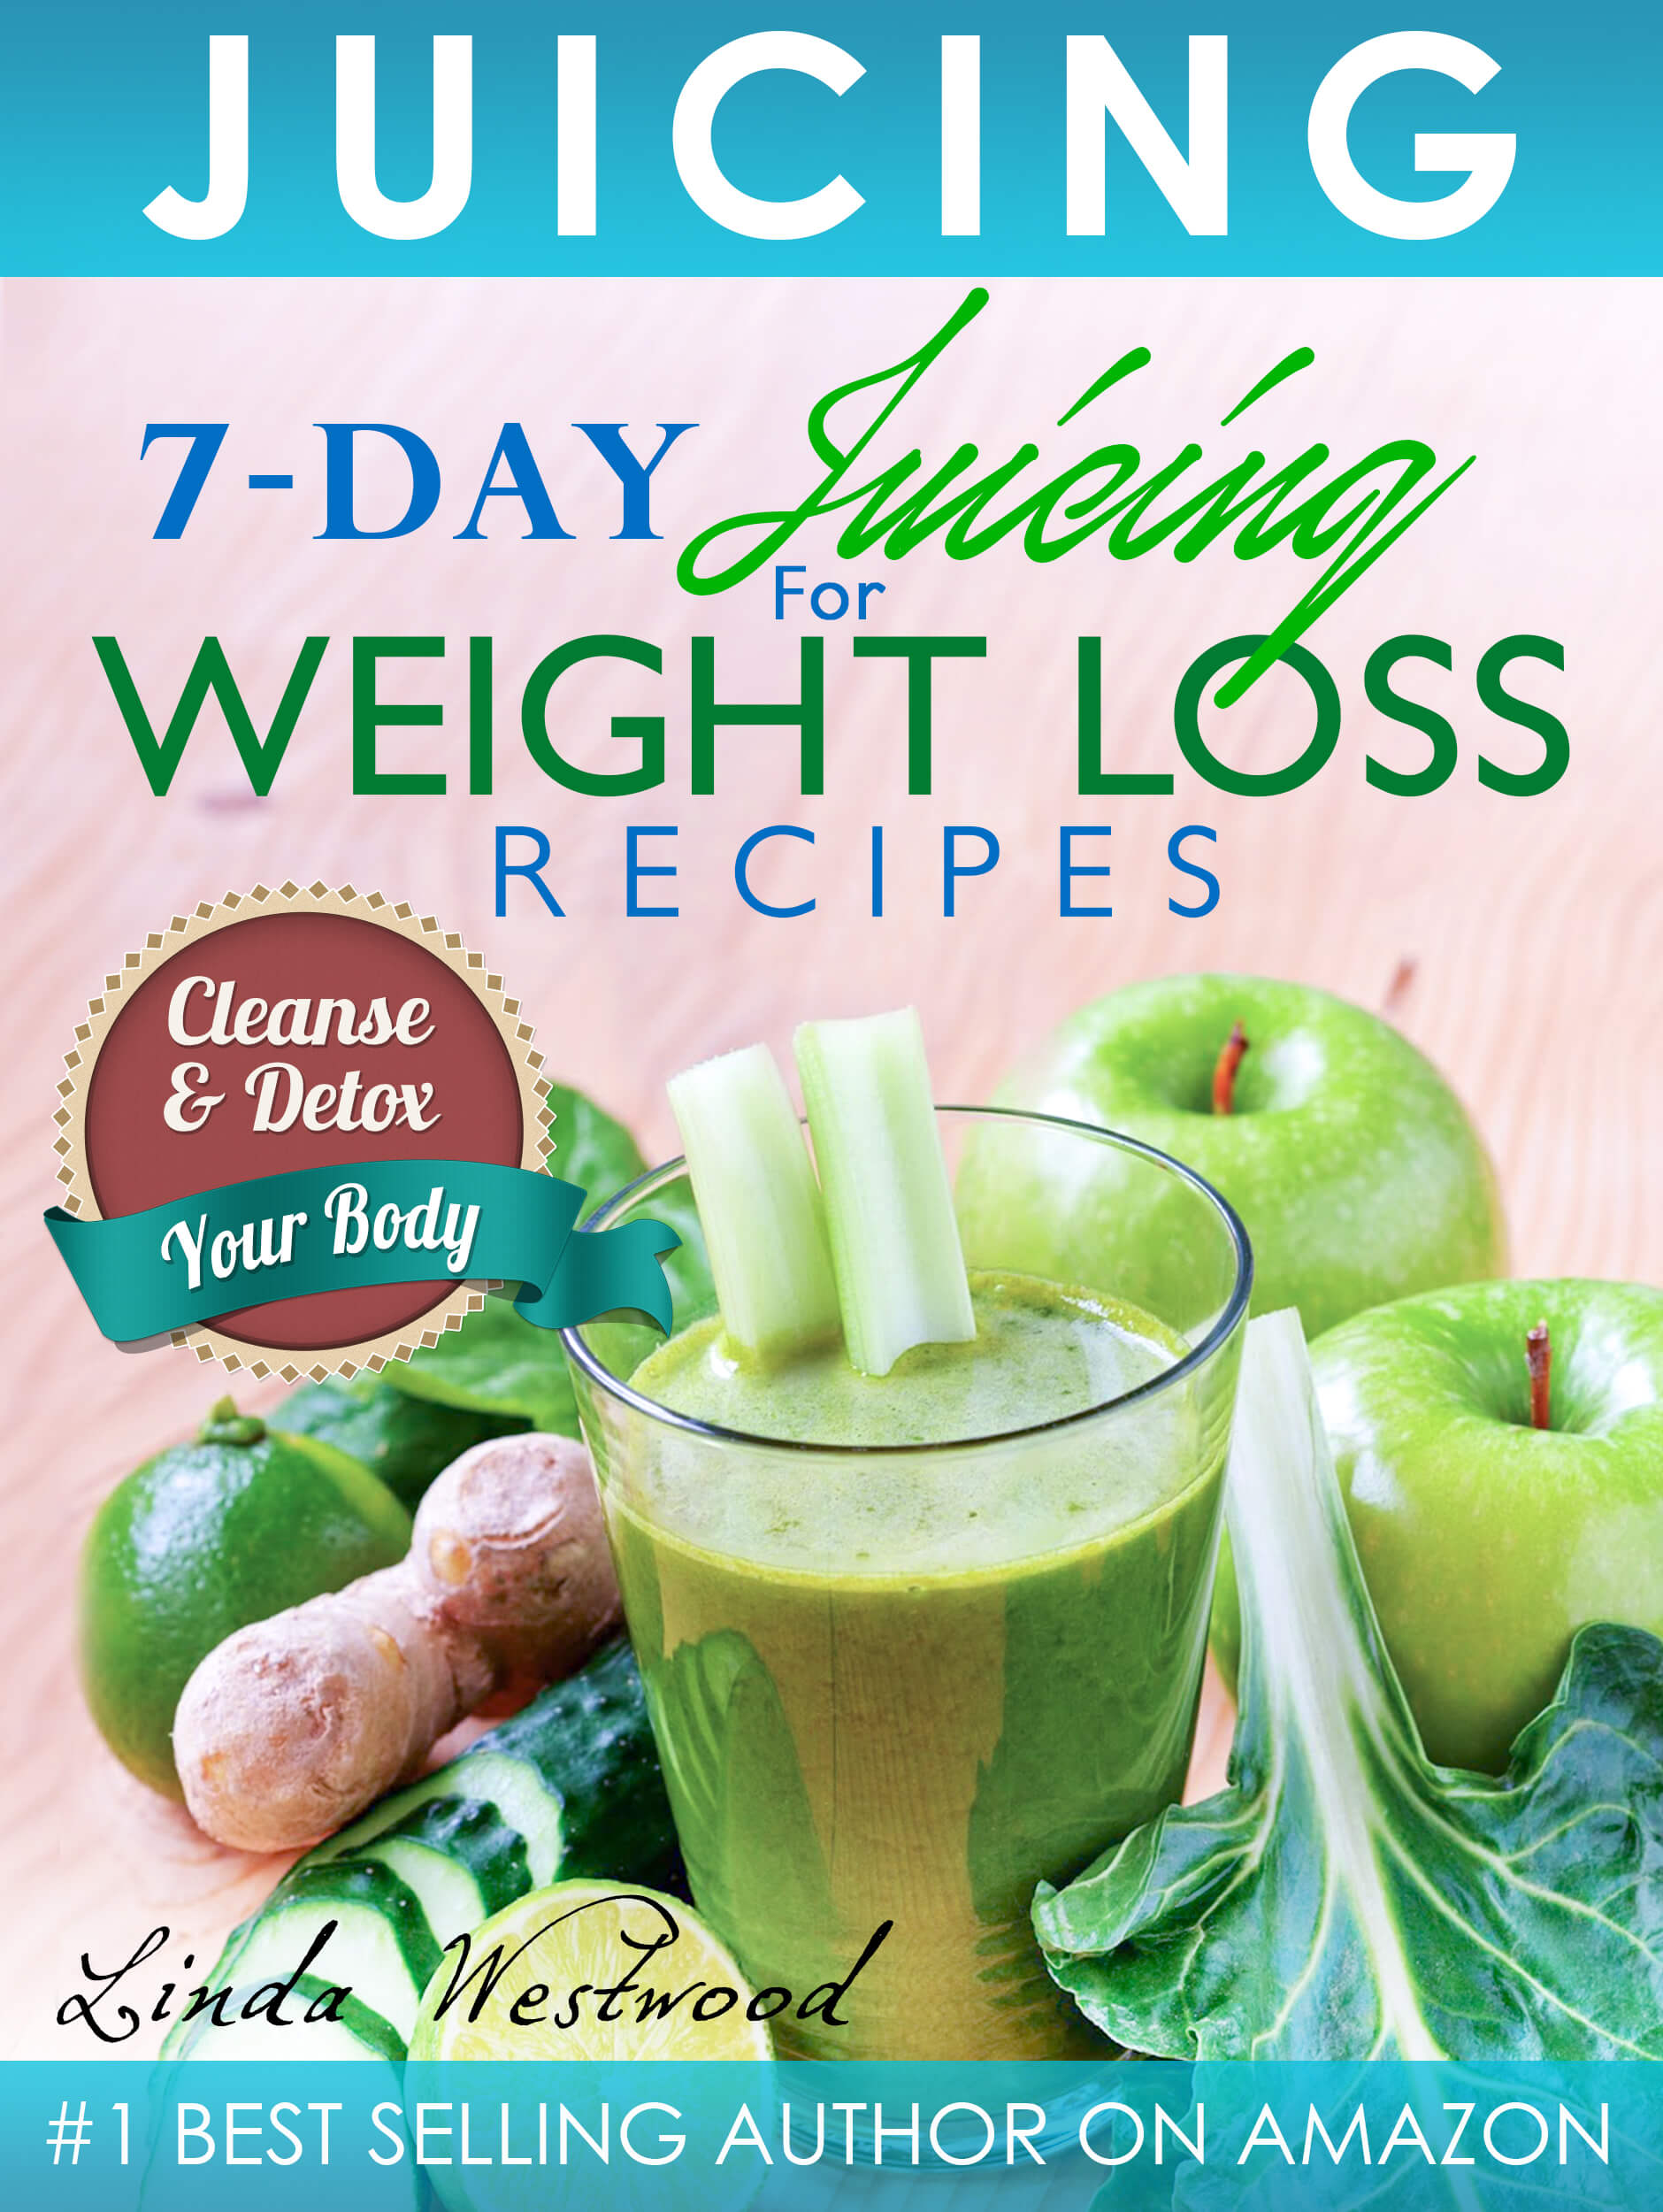 FREE: Juicing (5th Edition): 7-Day Juicing For Weight Loss Recipes: Cleanse & Detox Your Body by Linda Westwood